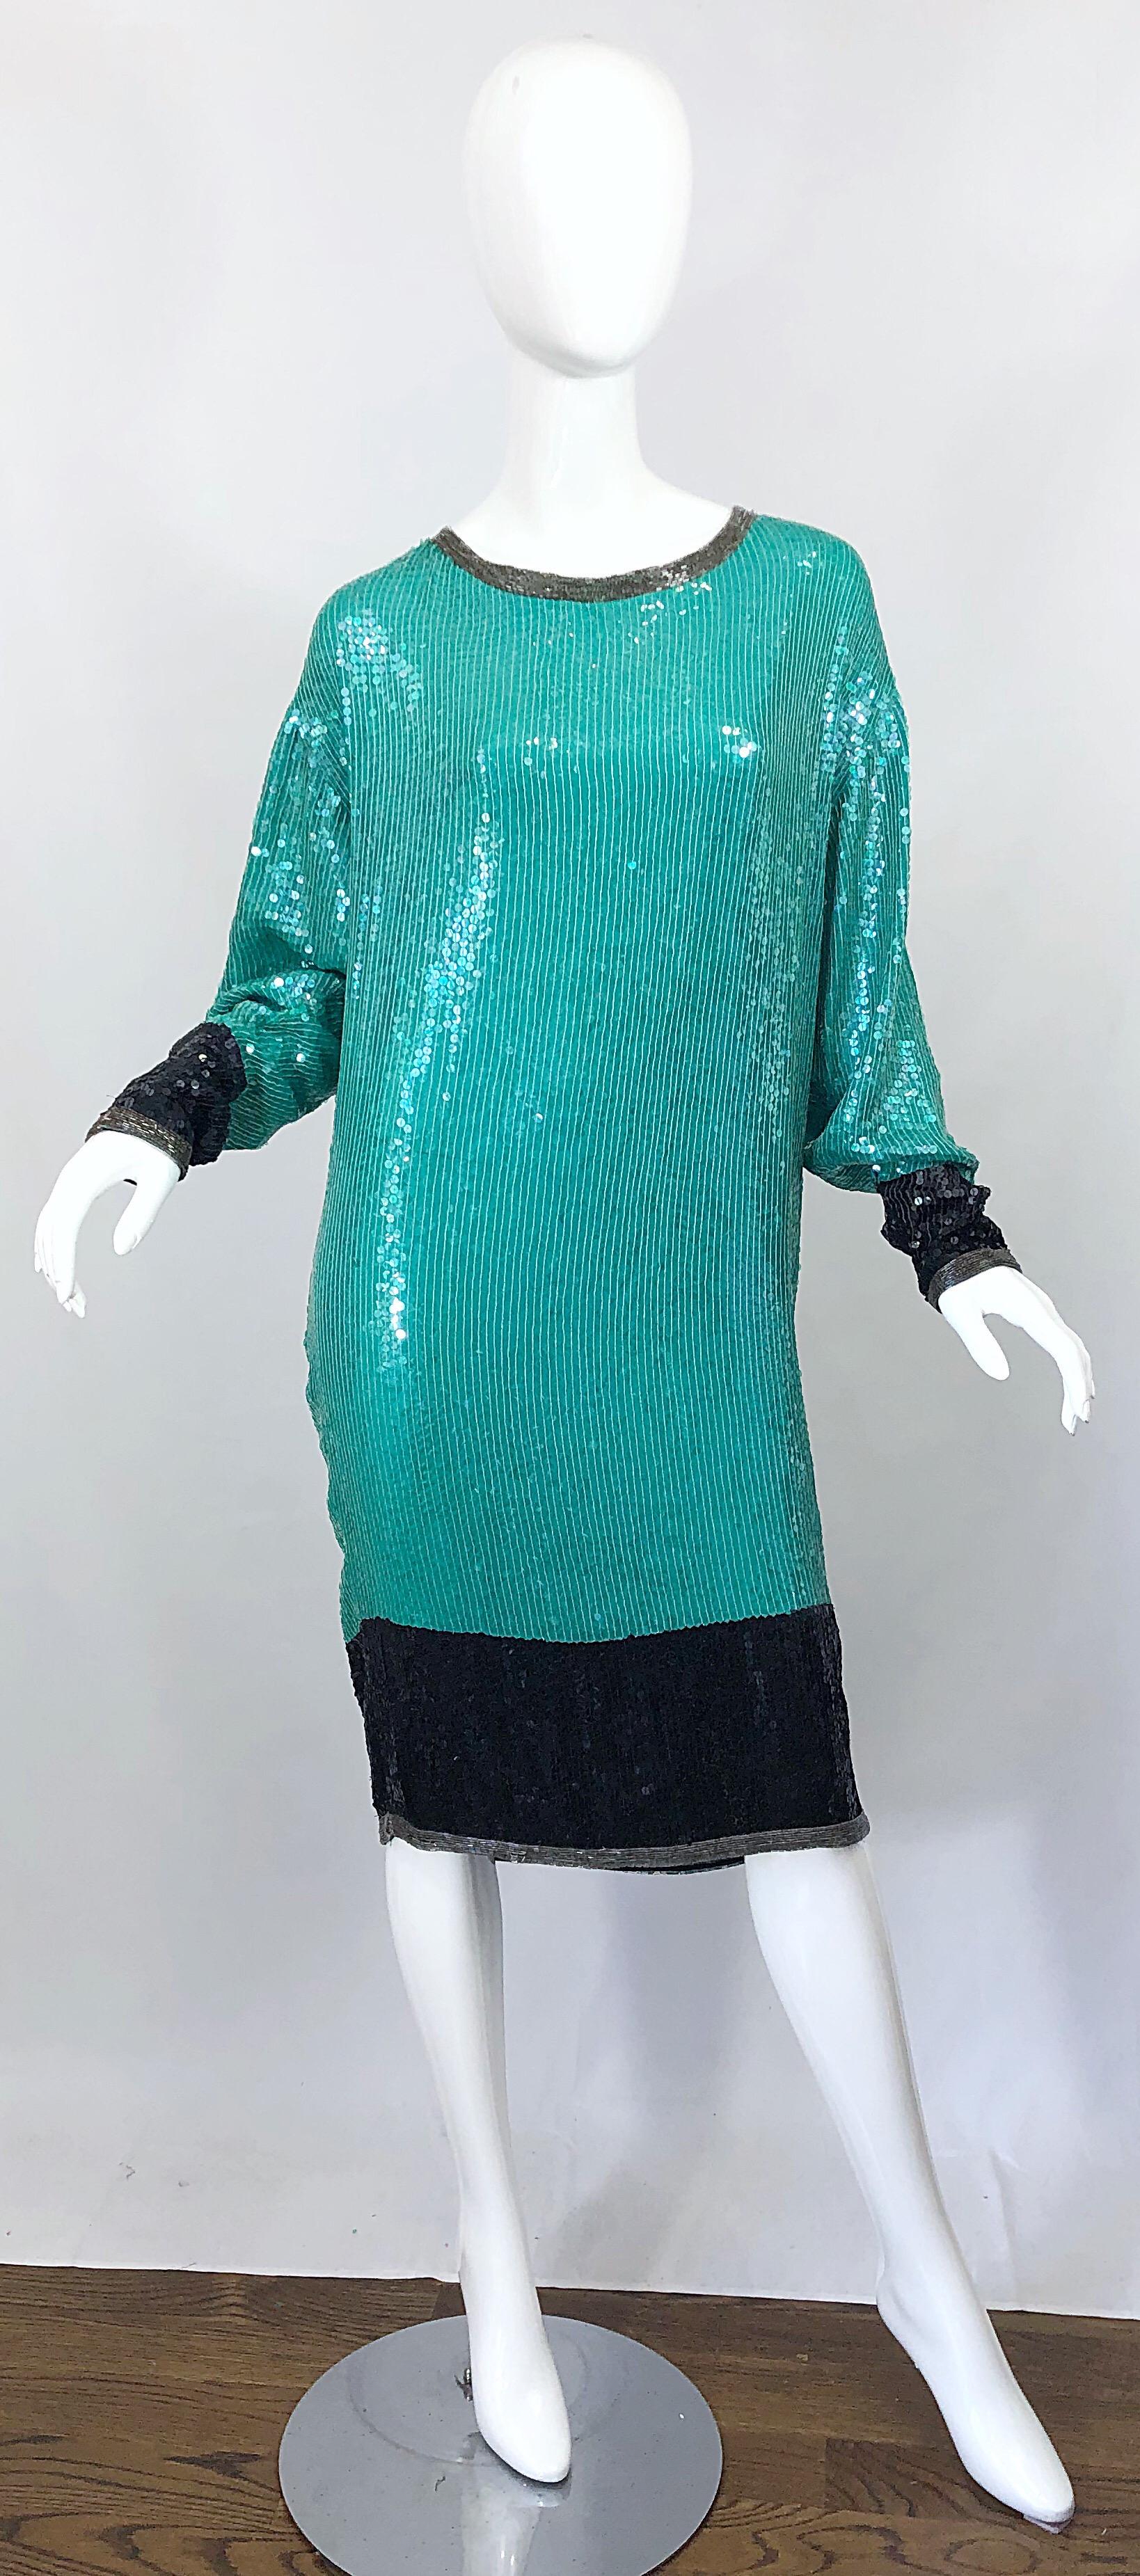 Amazing vintage late 70s HALSTON teal blue/green and black silk sequined and beaded dolman sleeve dress! Features multiple layers of the finest silk chiffon with thousands of hand-sewn sequins and beads throughout the entire dress. Black sequined